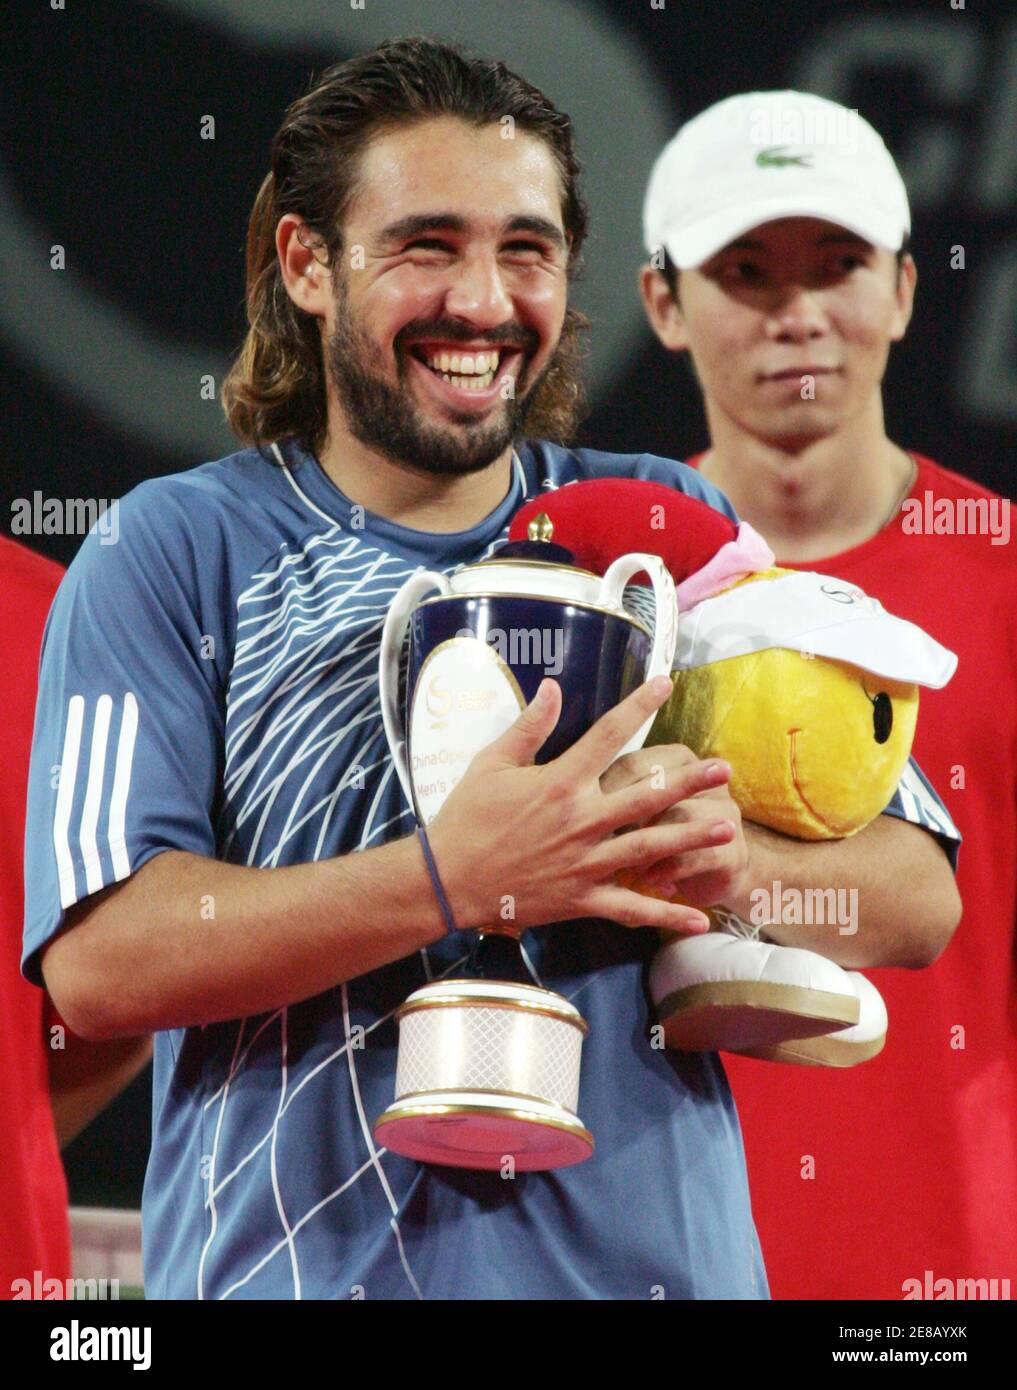 Marcos Baghdatis of Cyprus smiles as he holds the China Open trophy during a prize presentation ceremony at the Beijing Tennis Centre in Beijing September 17, 2006. Baghdatis won his first ATP title with a 6-4 6-0 victory over Croatian Mario Ancic at the China Open on Sunday.     REUTERS/Jason Lee (CHINA) Stock Photo